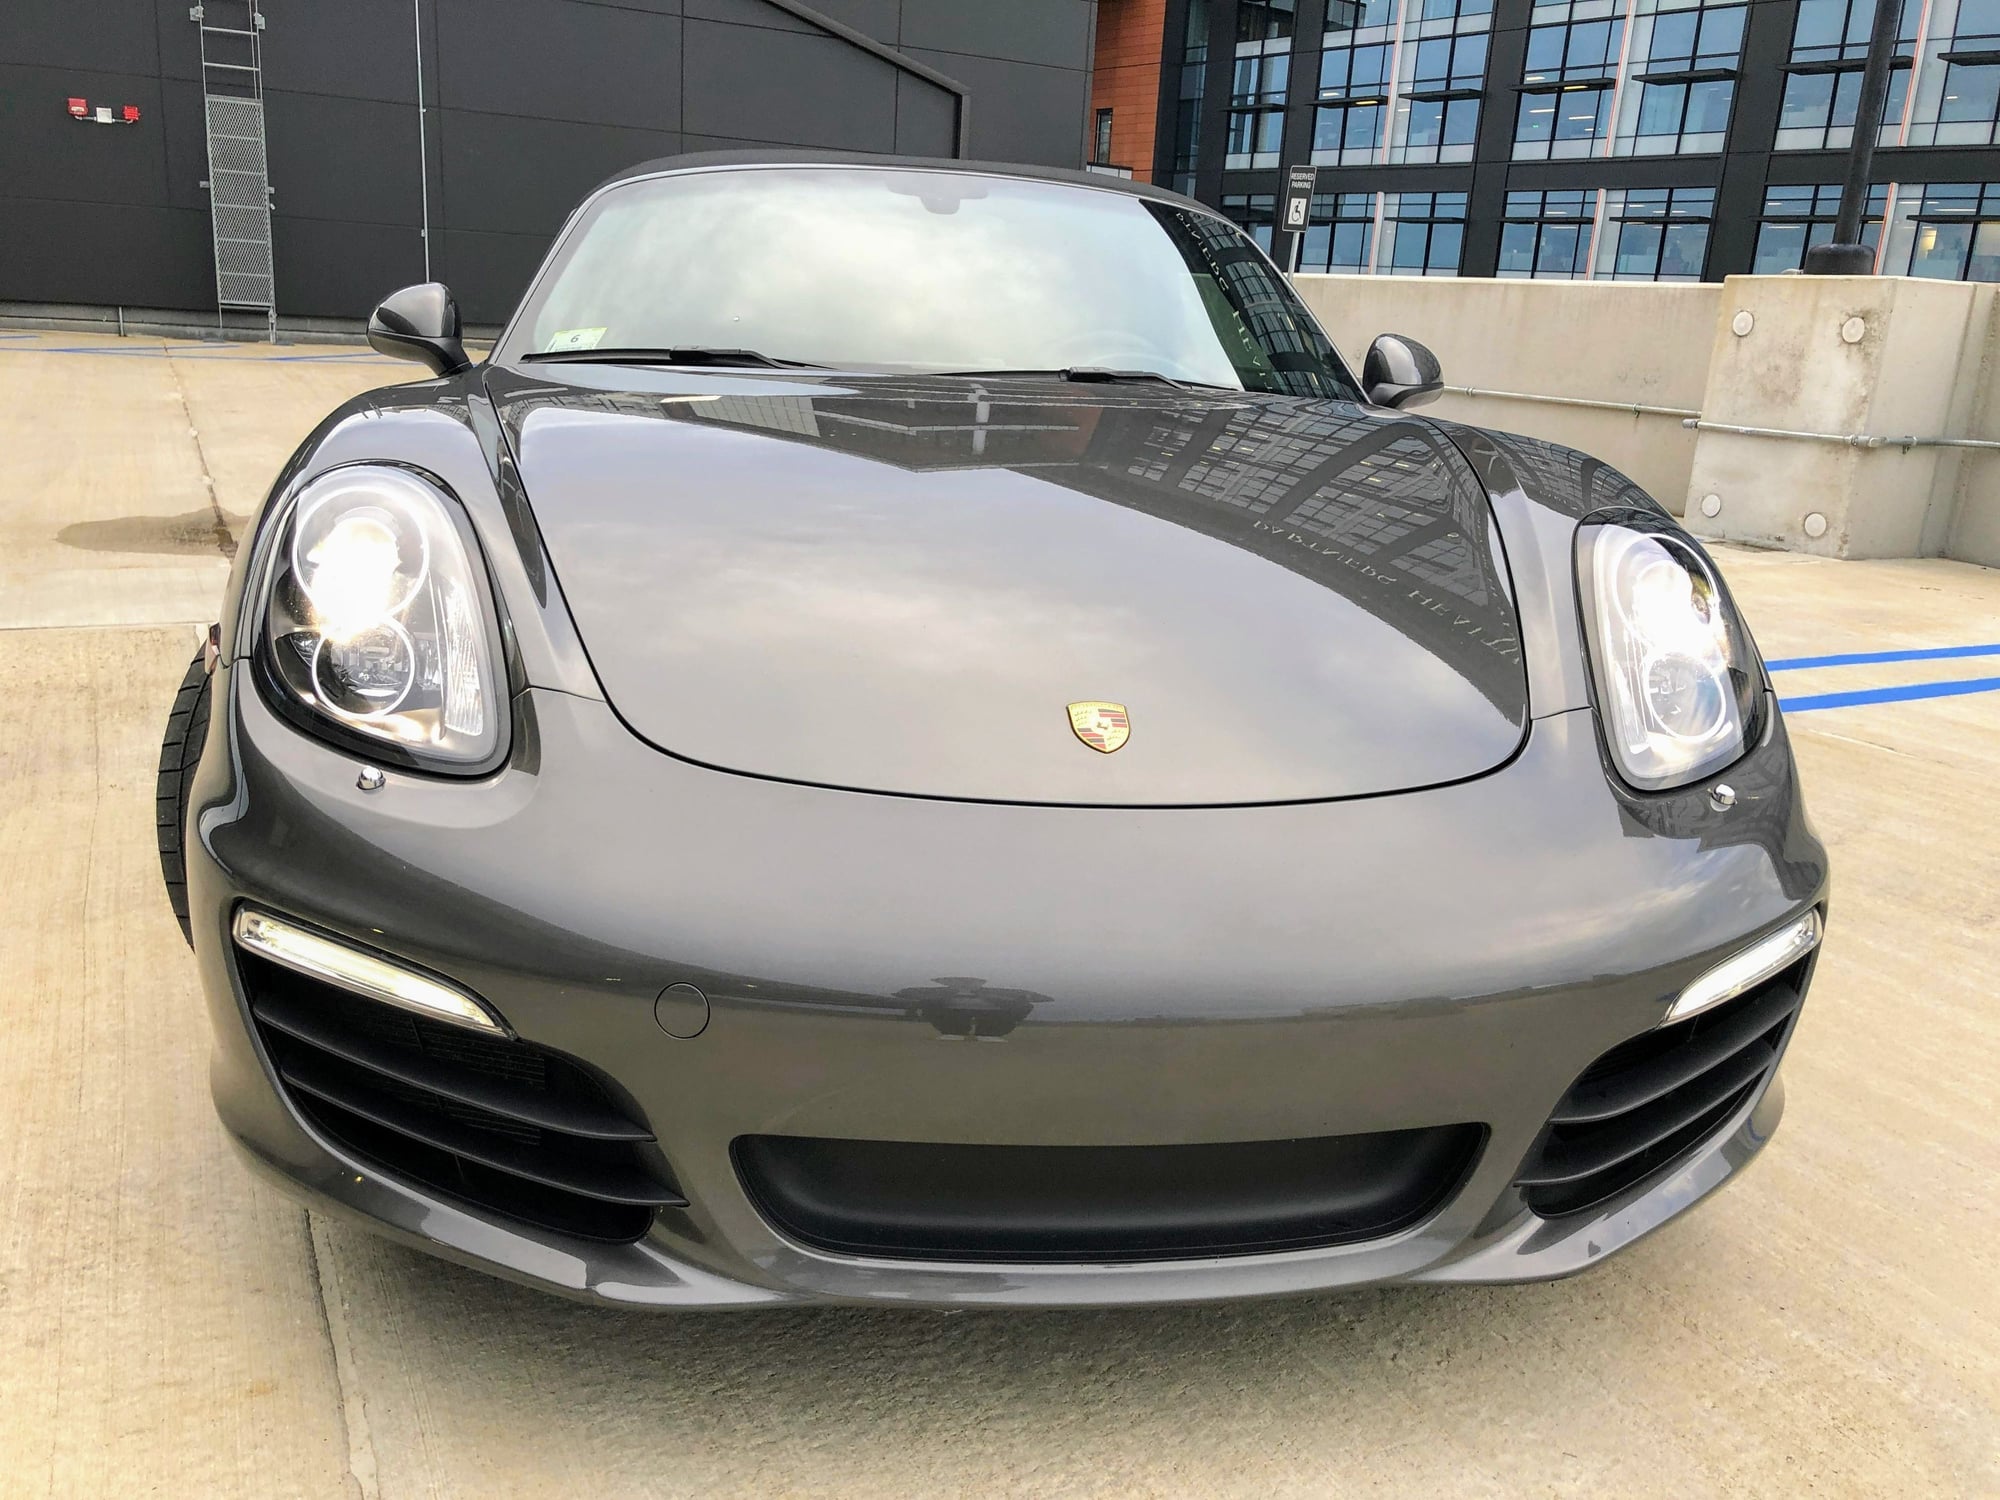 2013 Porsche Boxster - 2013 981 Boxster S with lots of options, Agate grey - Used - VIN WP0CB2A82DS130170 - 29,800 Miles - 6 cyl - 2WD - Automatic - Convertible - Gray - Sunnyvale, CA 94085, United States